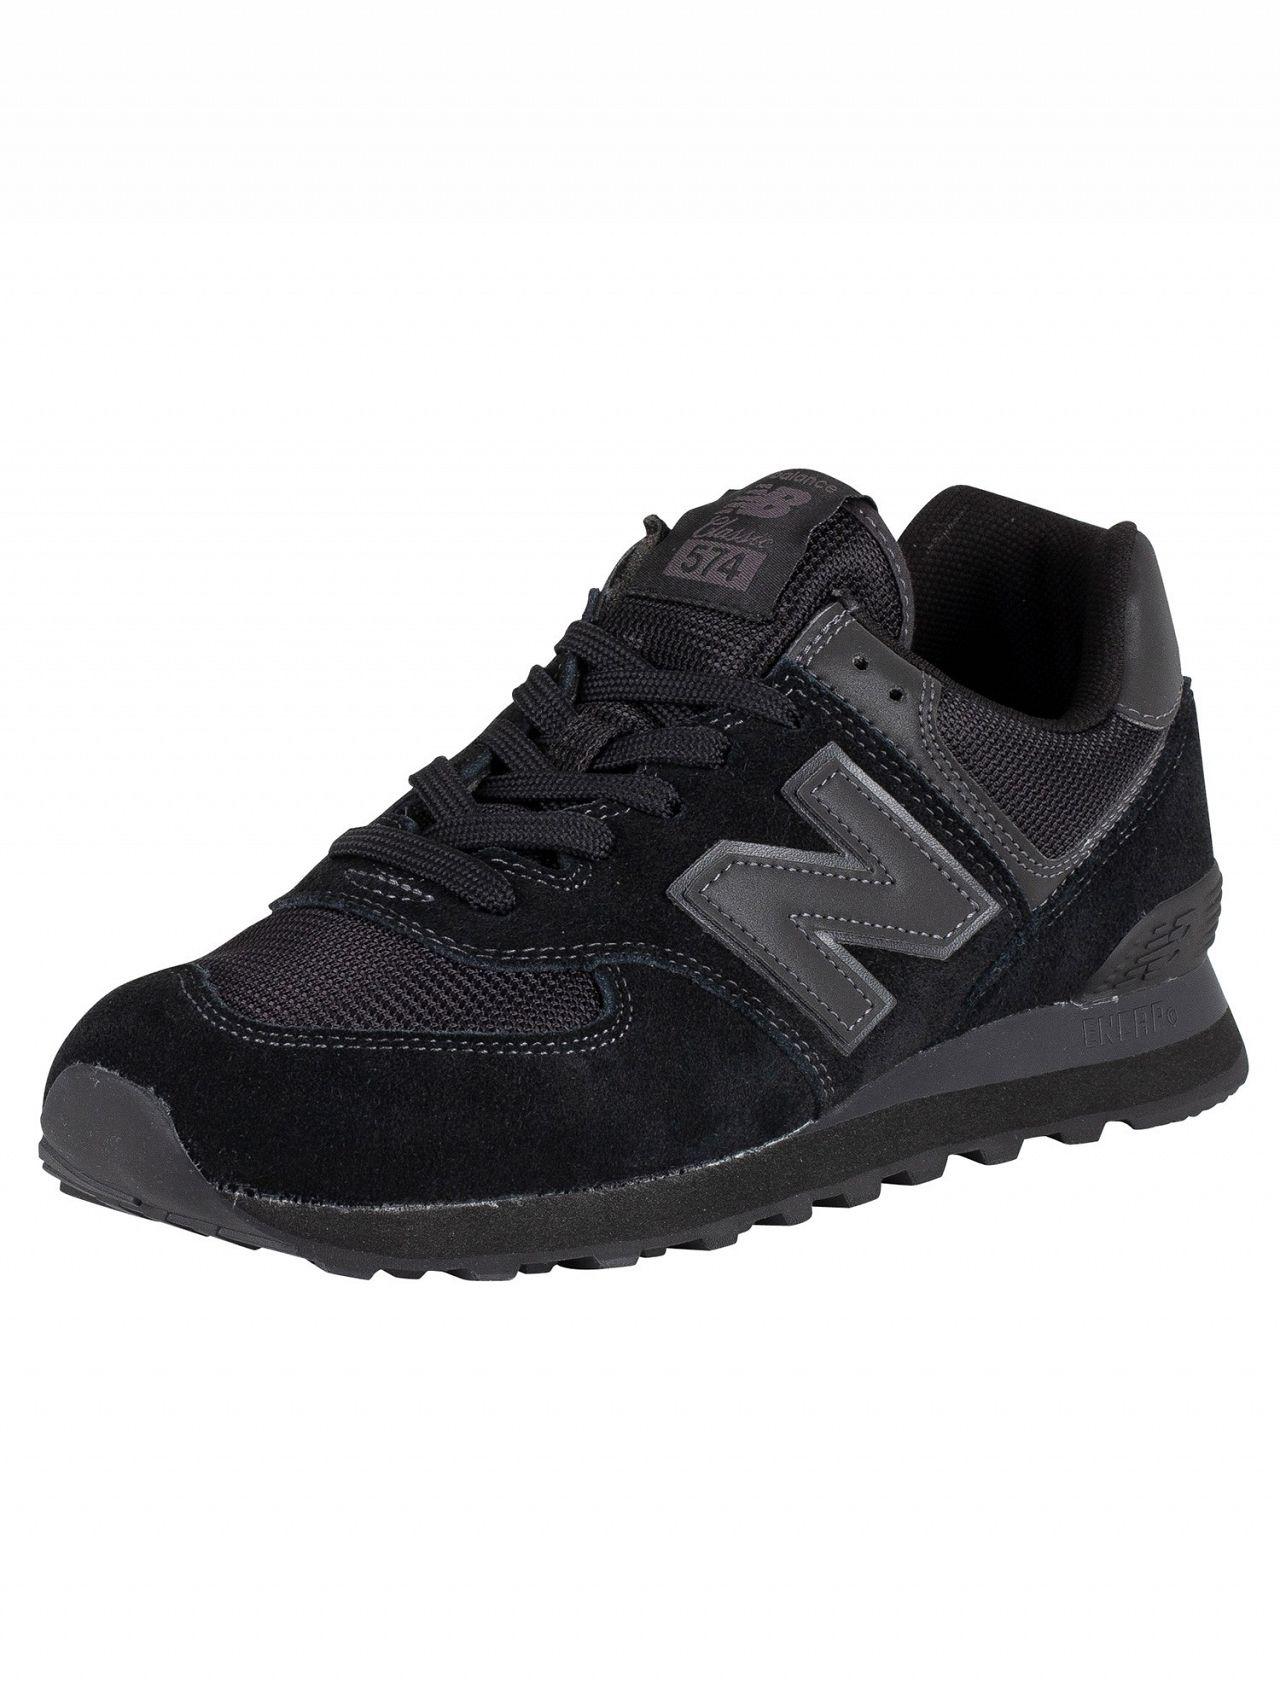 New Balance Blackout 574 Suede Trainers for Men - Lyst